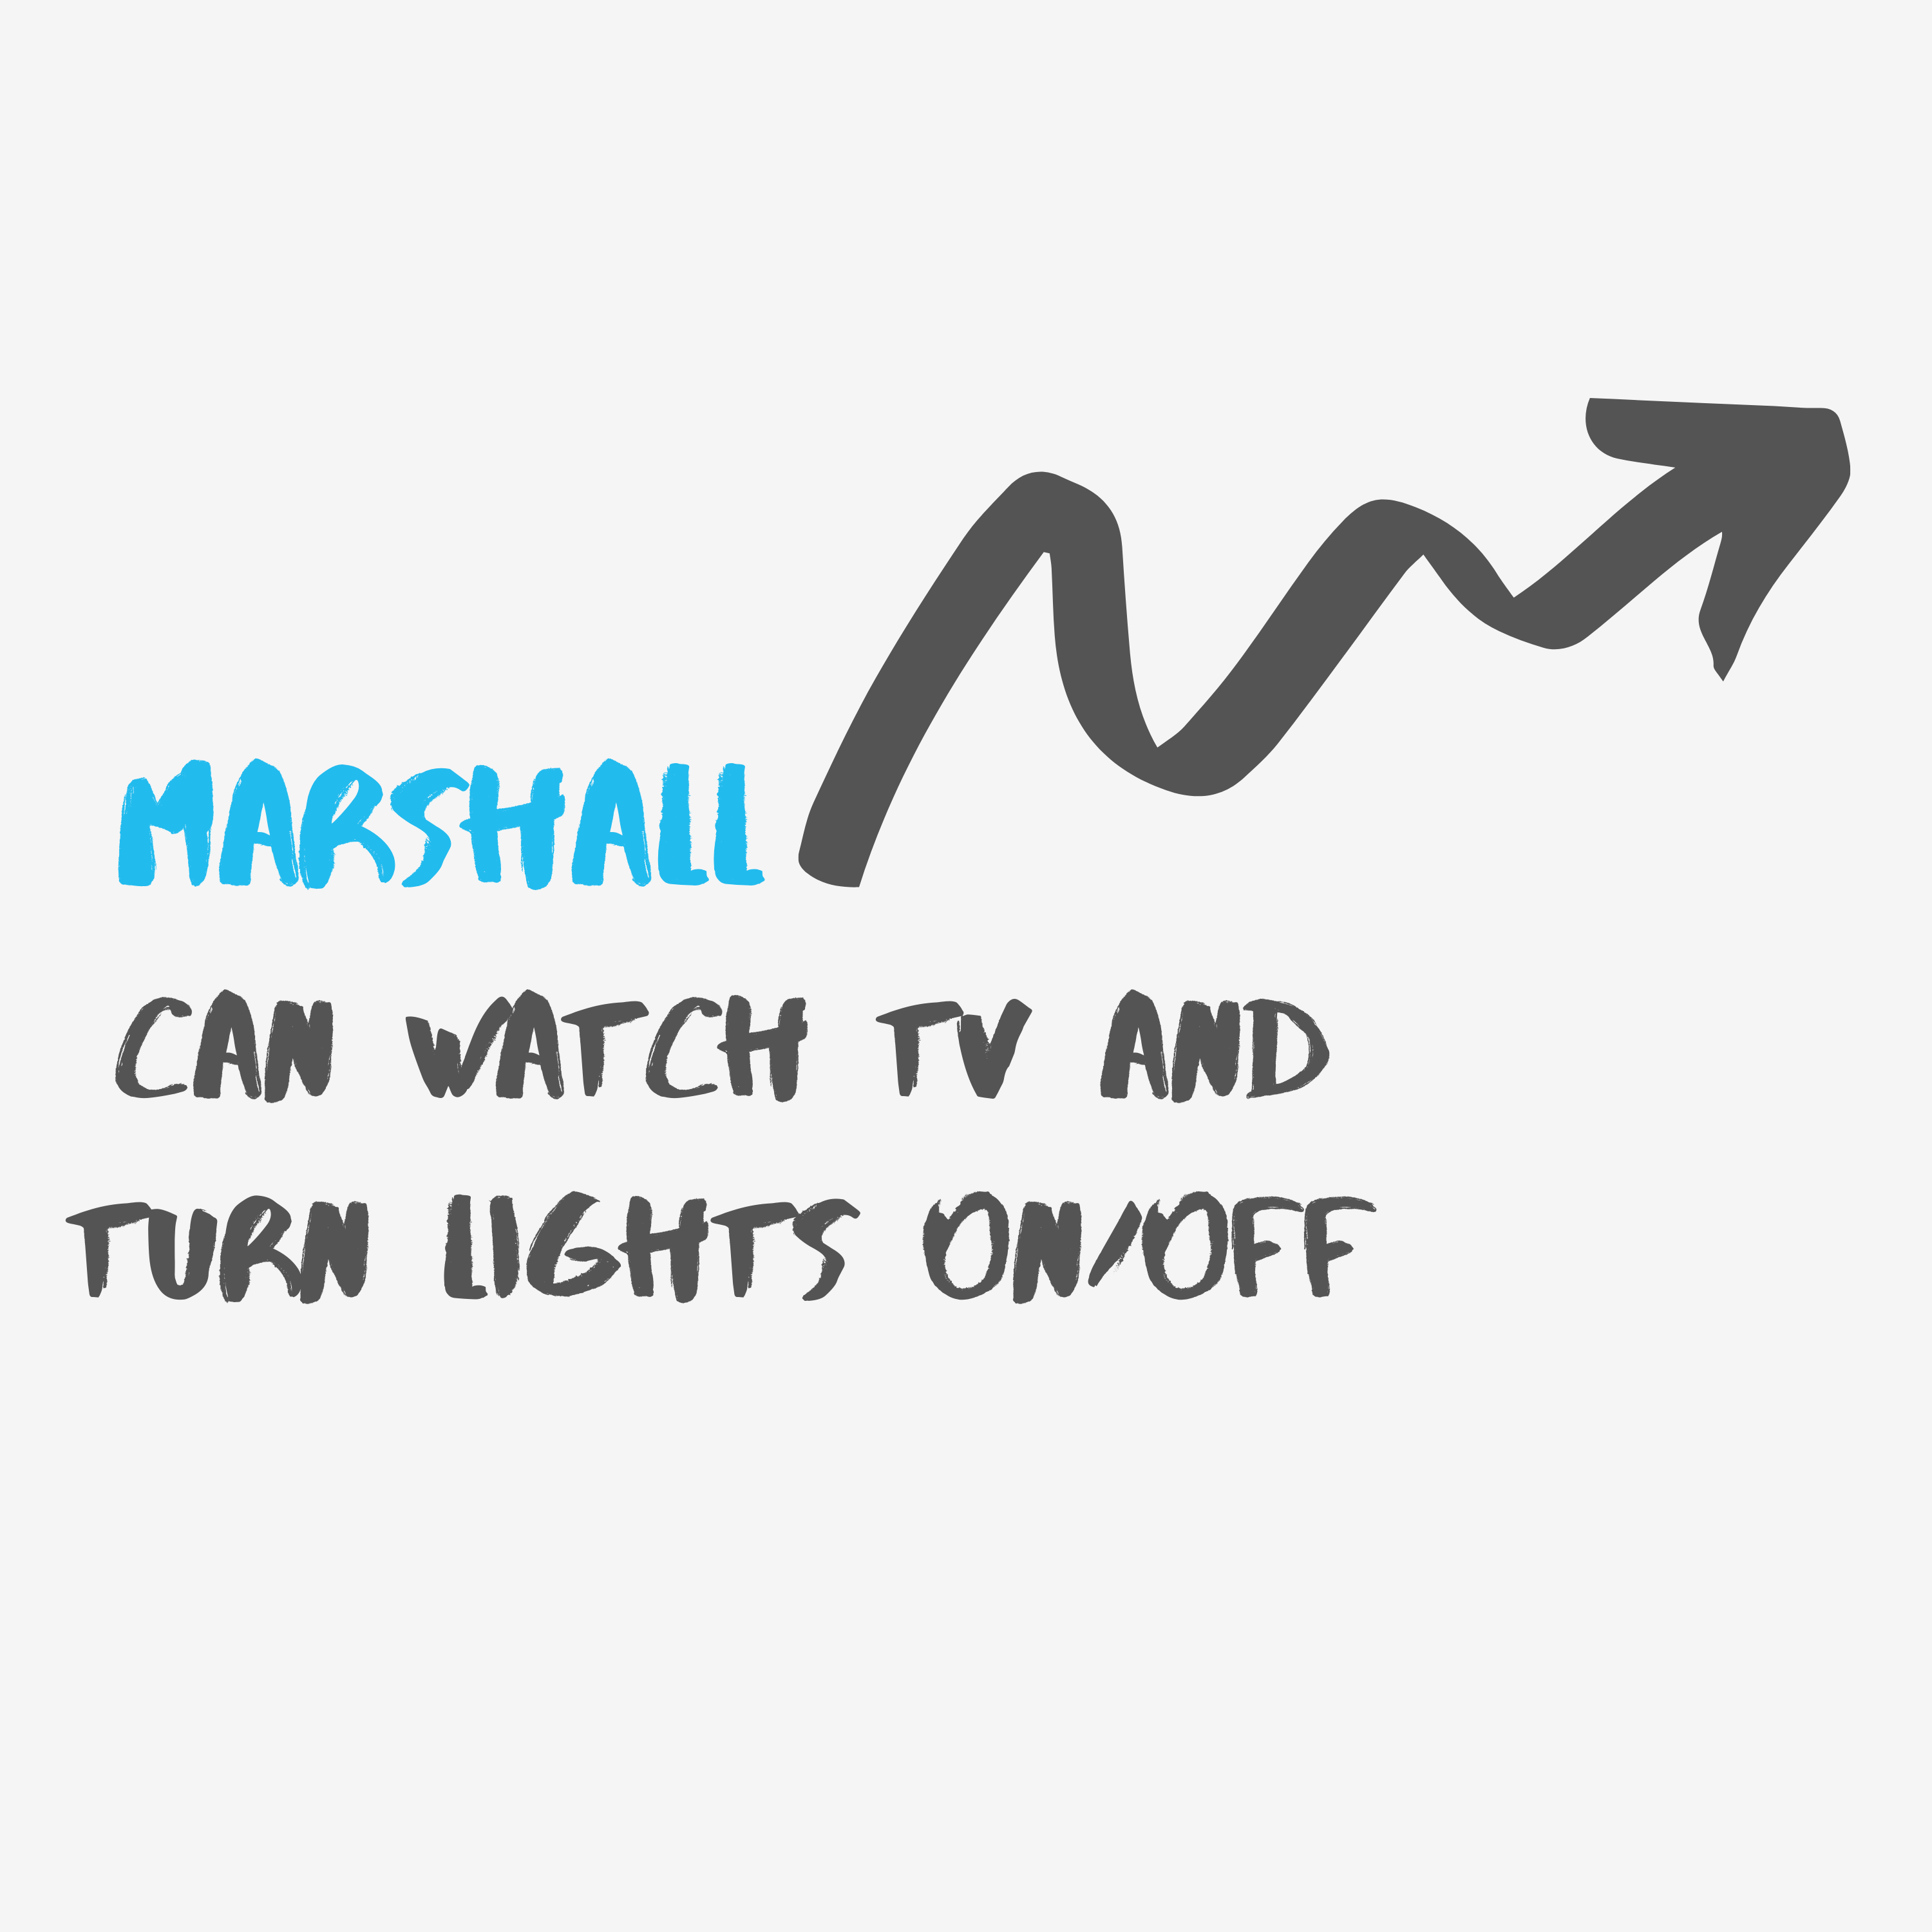 Marshall can watch tv and turn lights On/Off with tecla- e watch the video